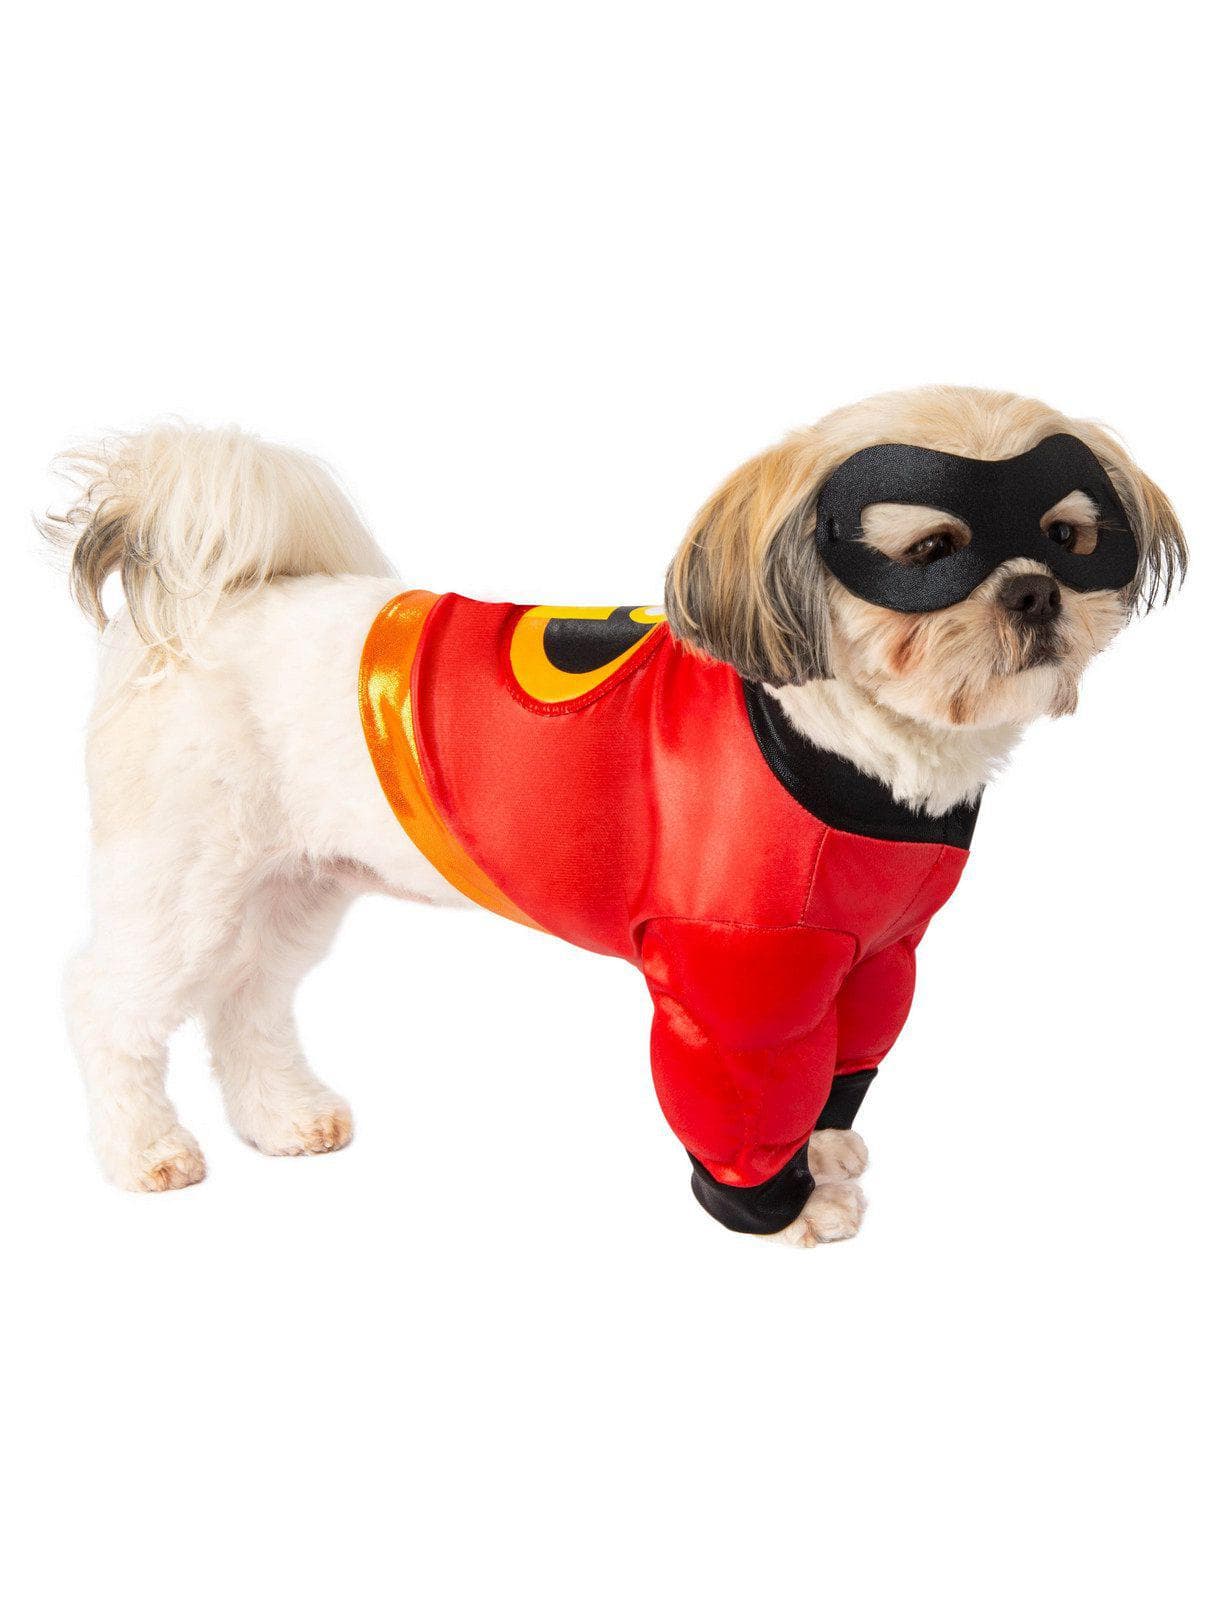 The Incredibles Pet Costume - costumes.com